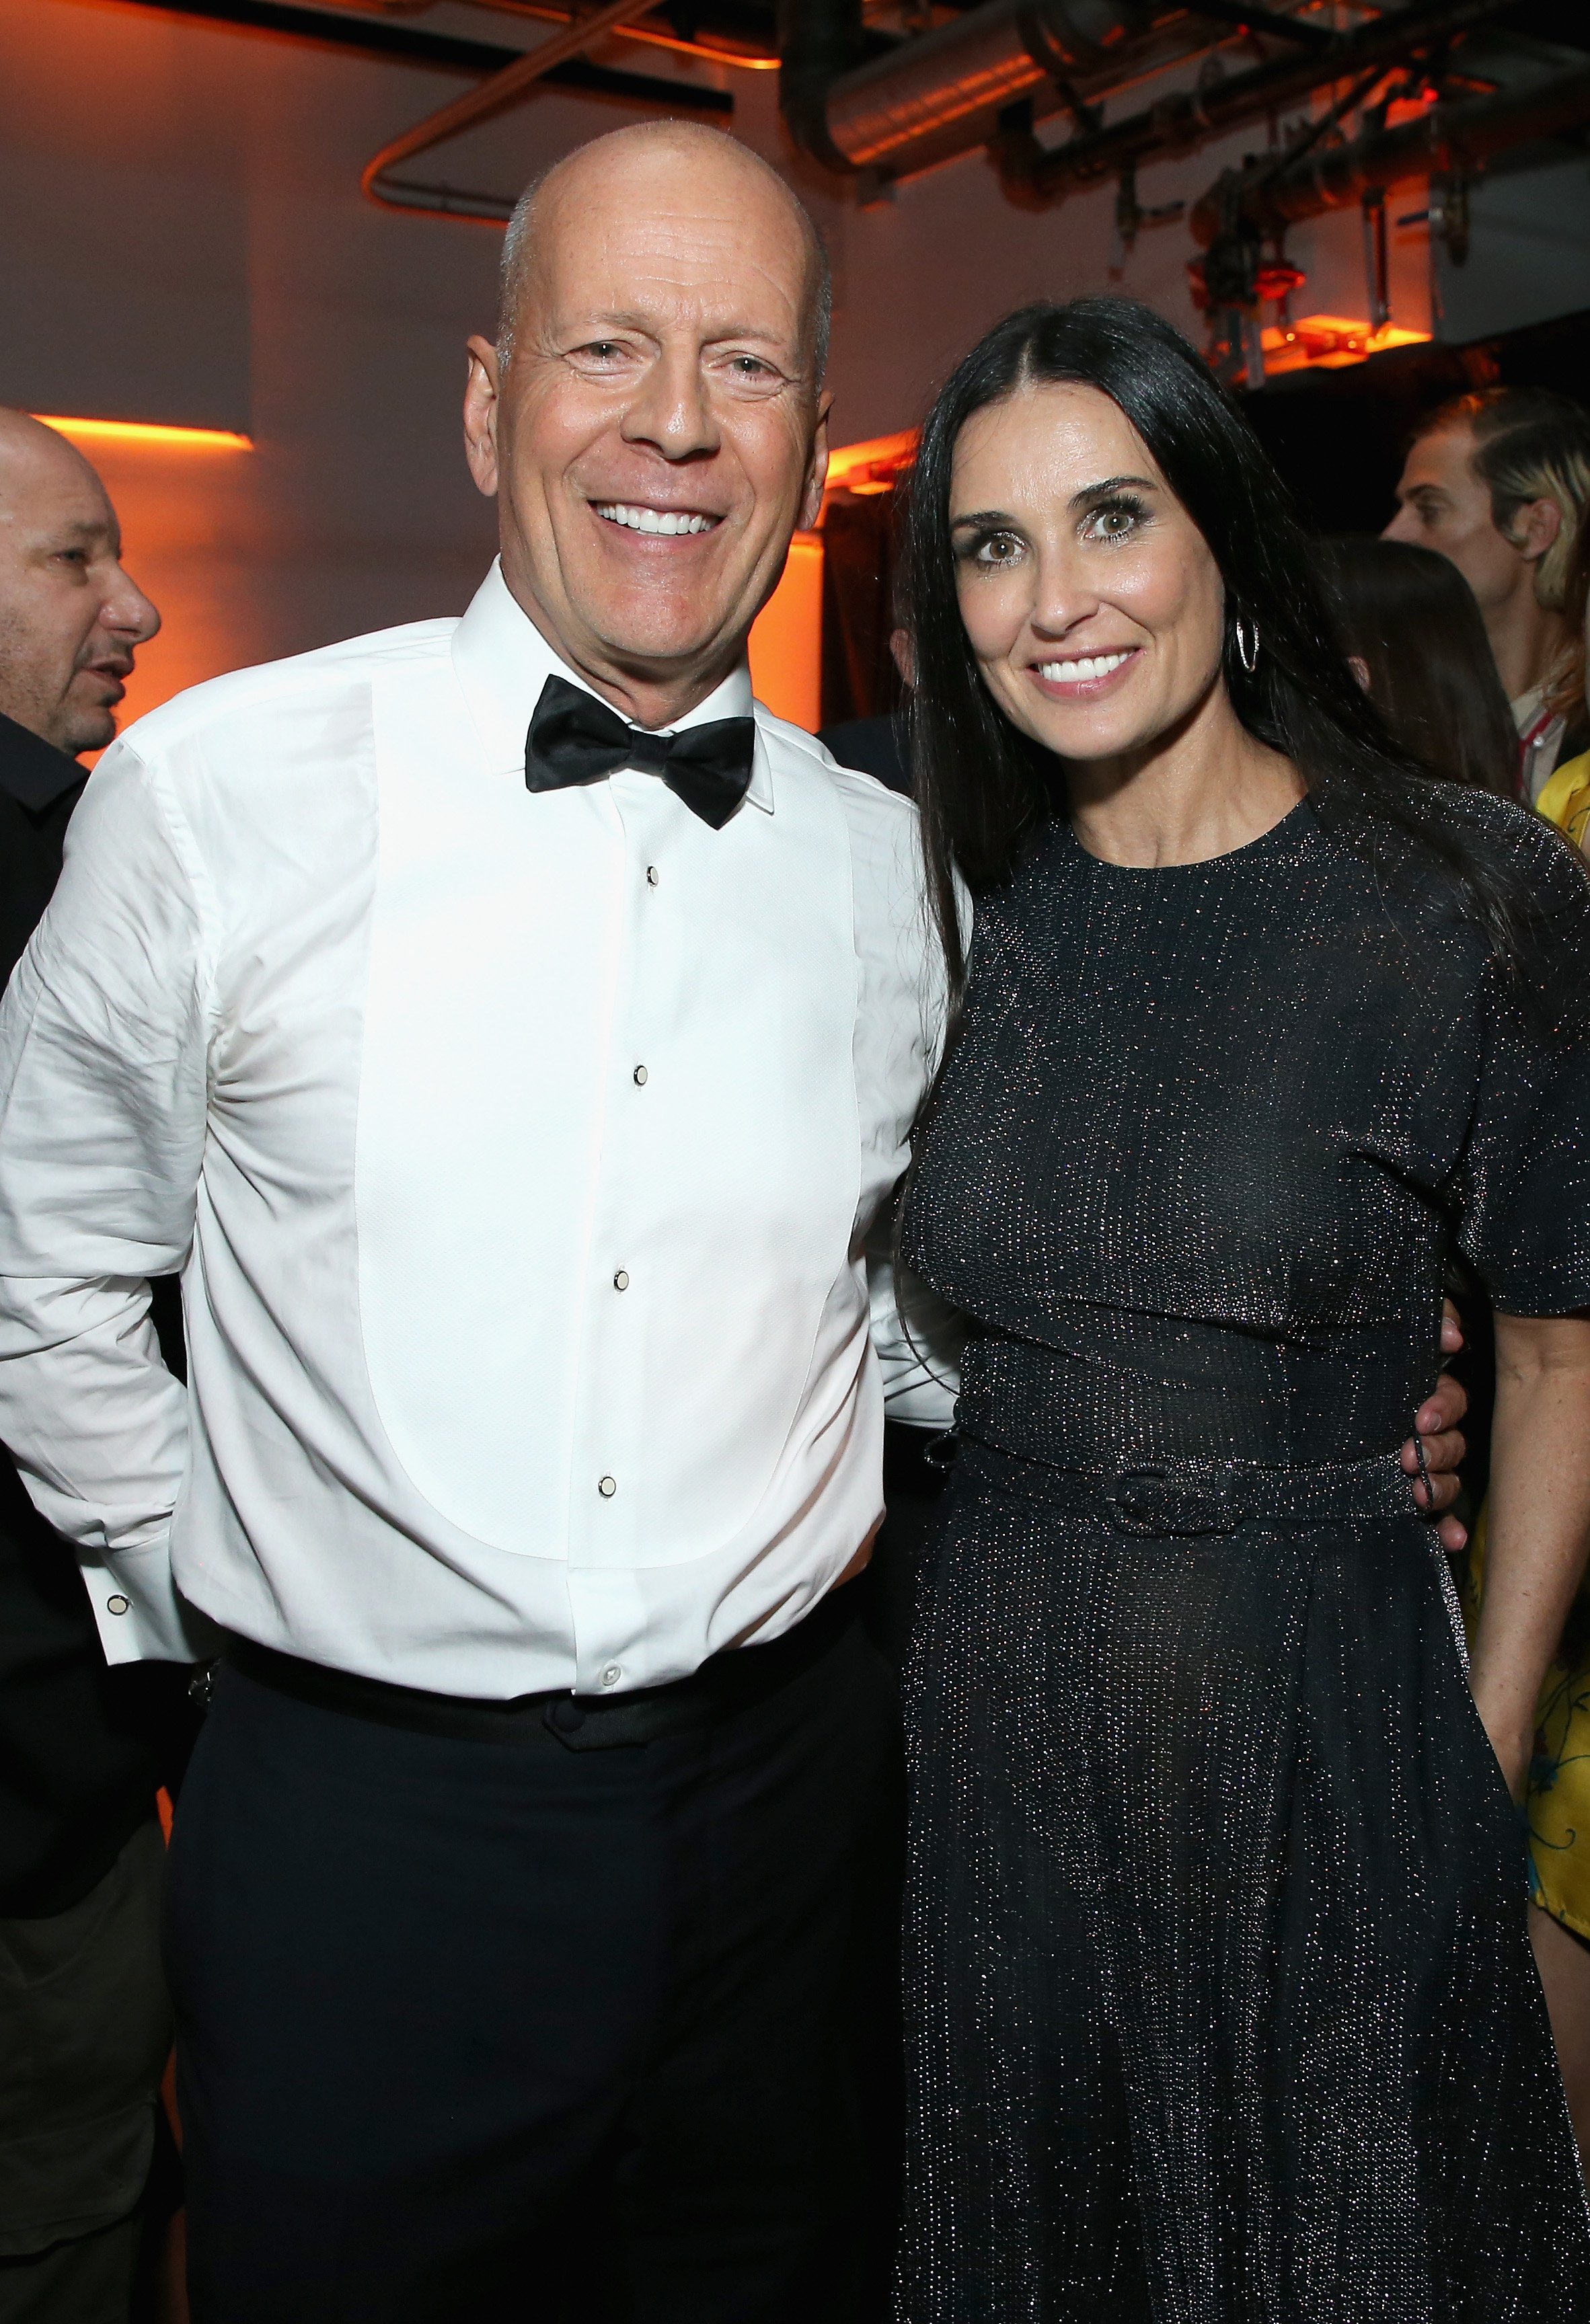 Bruce Willis and Demi Moore attend the after party for the Comedy Central Roast of Bruce Willis at NeueHouse on July 14, 2018. | Photo: Getty Images